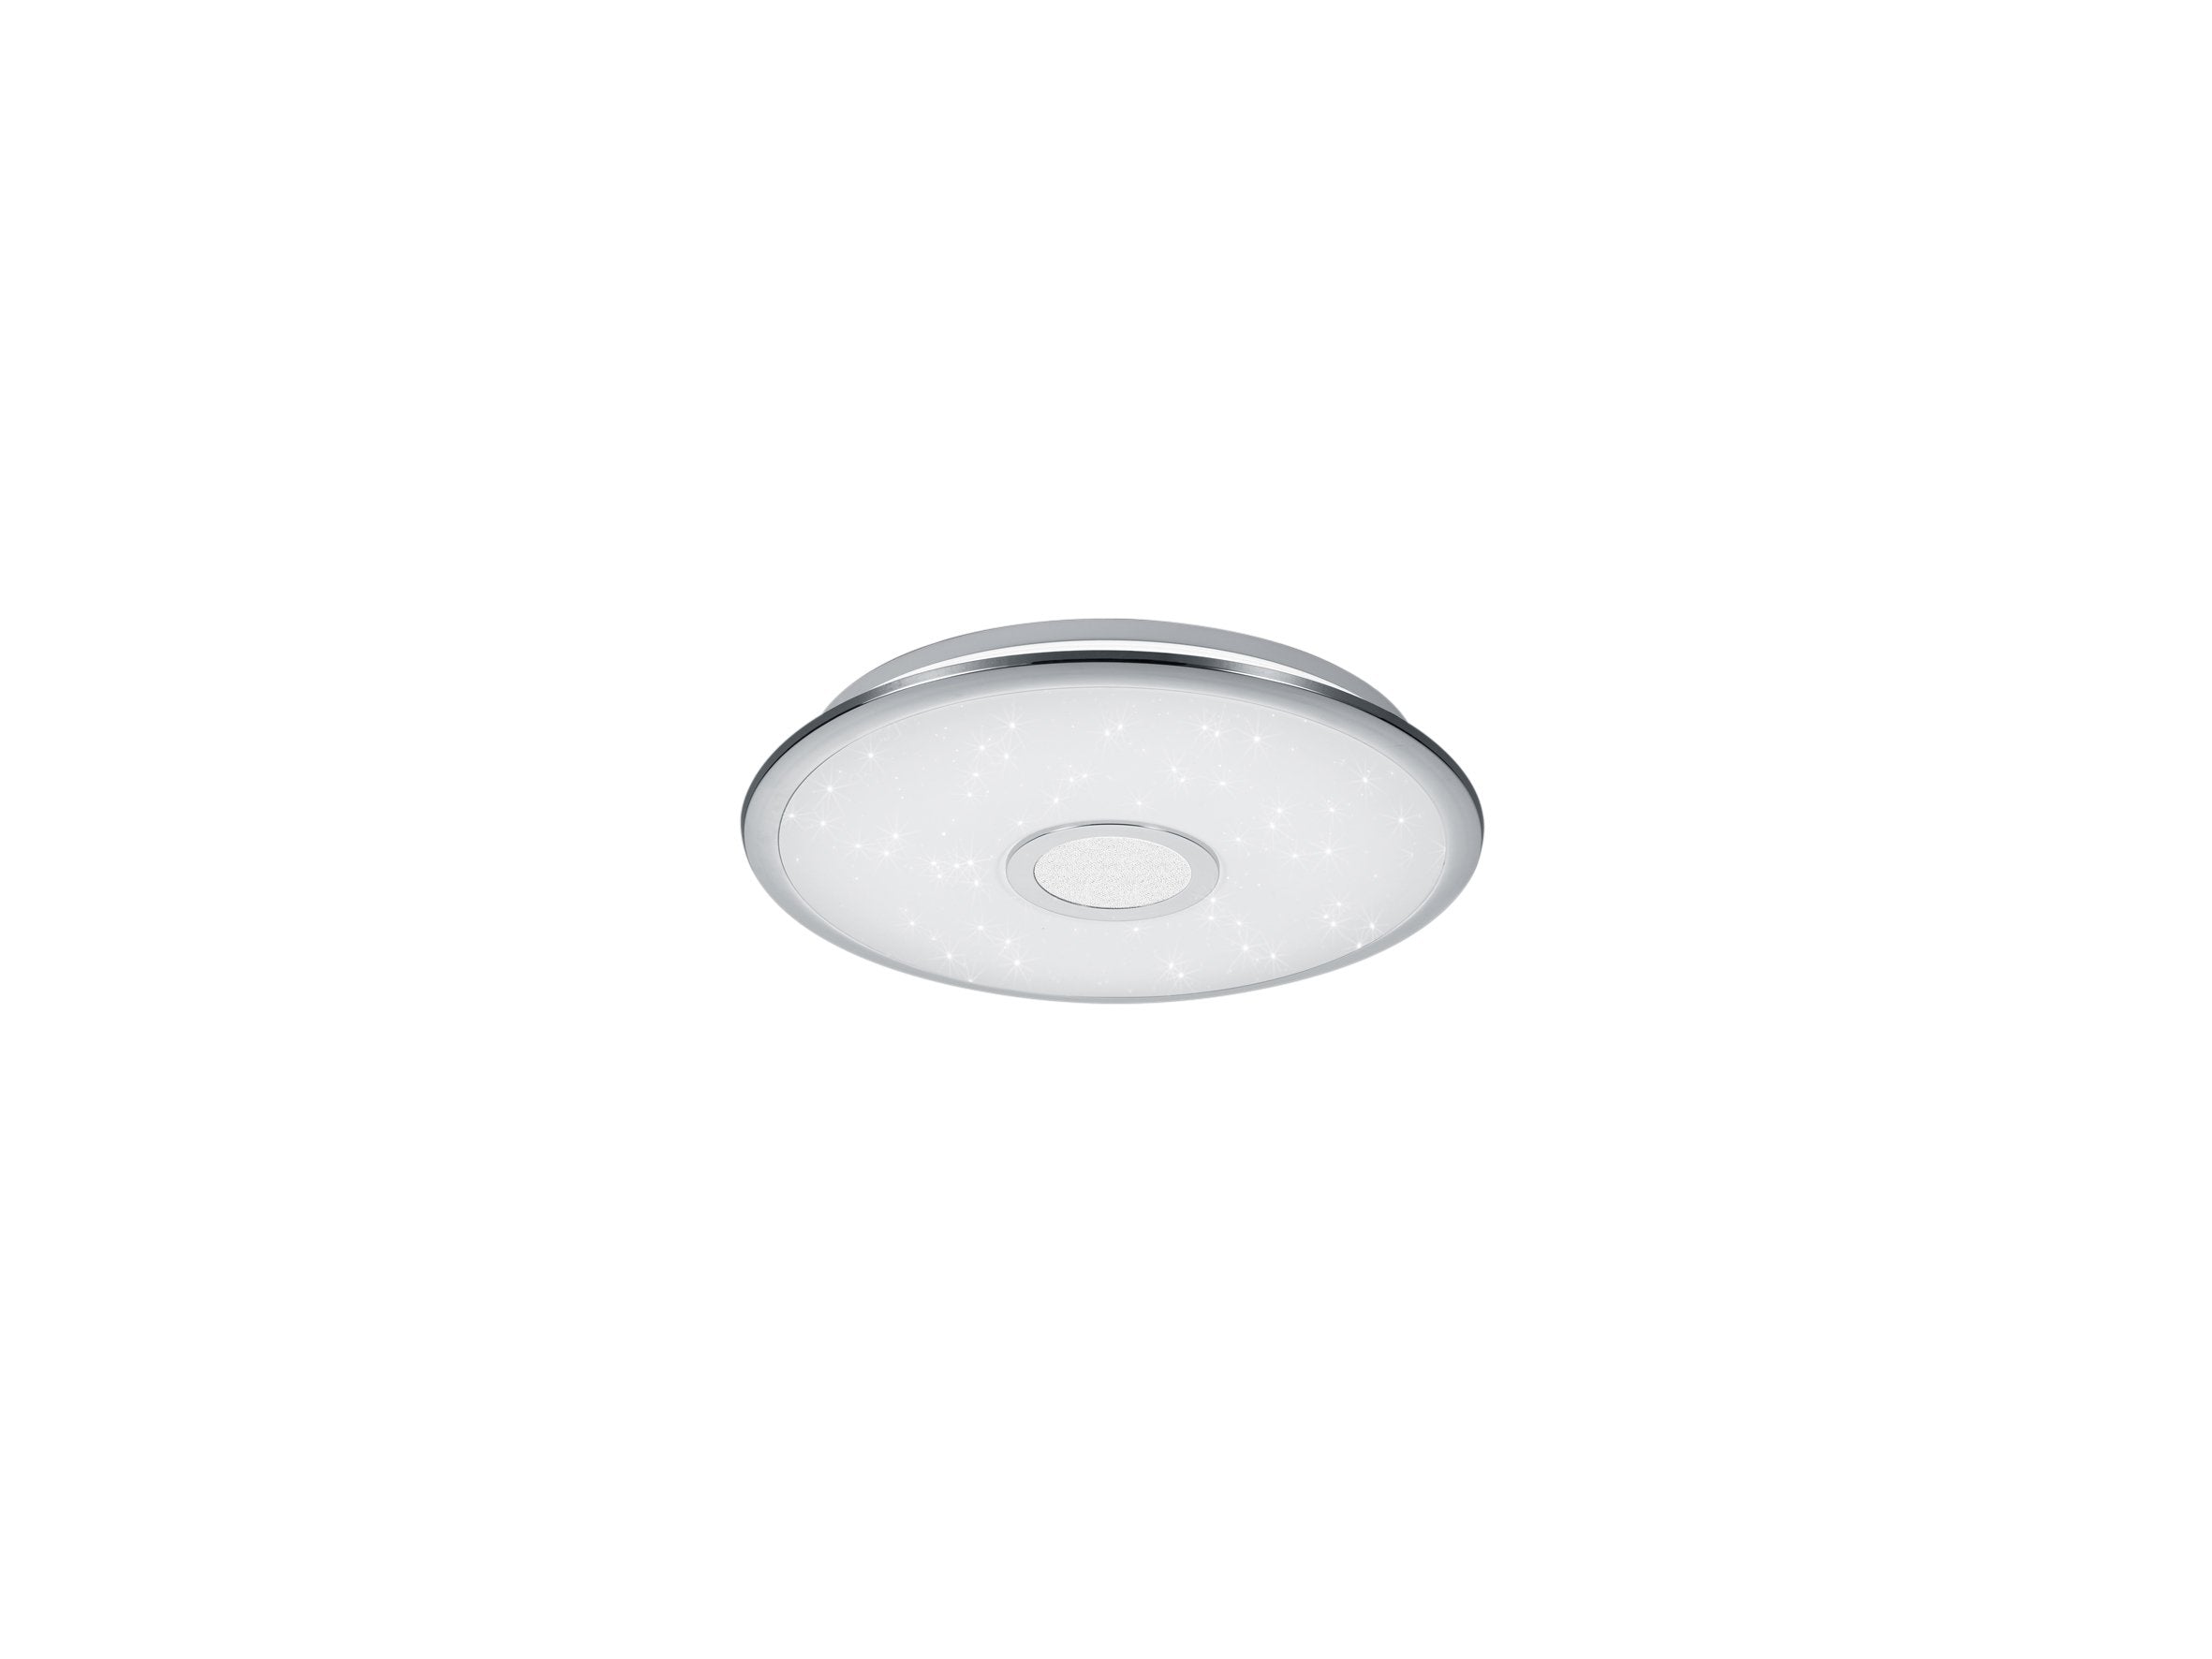 Osaka 30W CCT LED starlight effect circular ceiling light with remote control